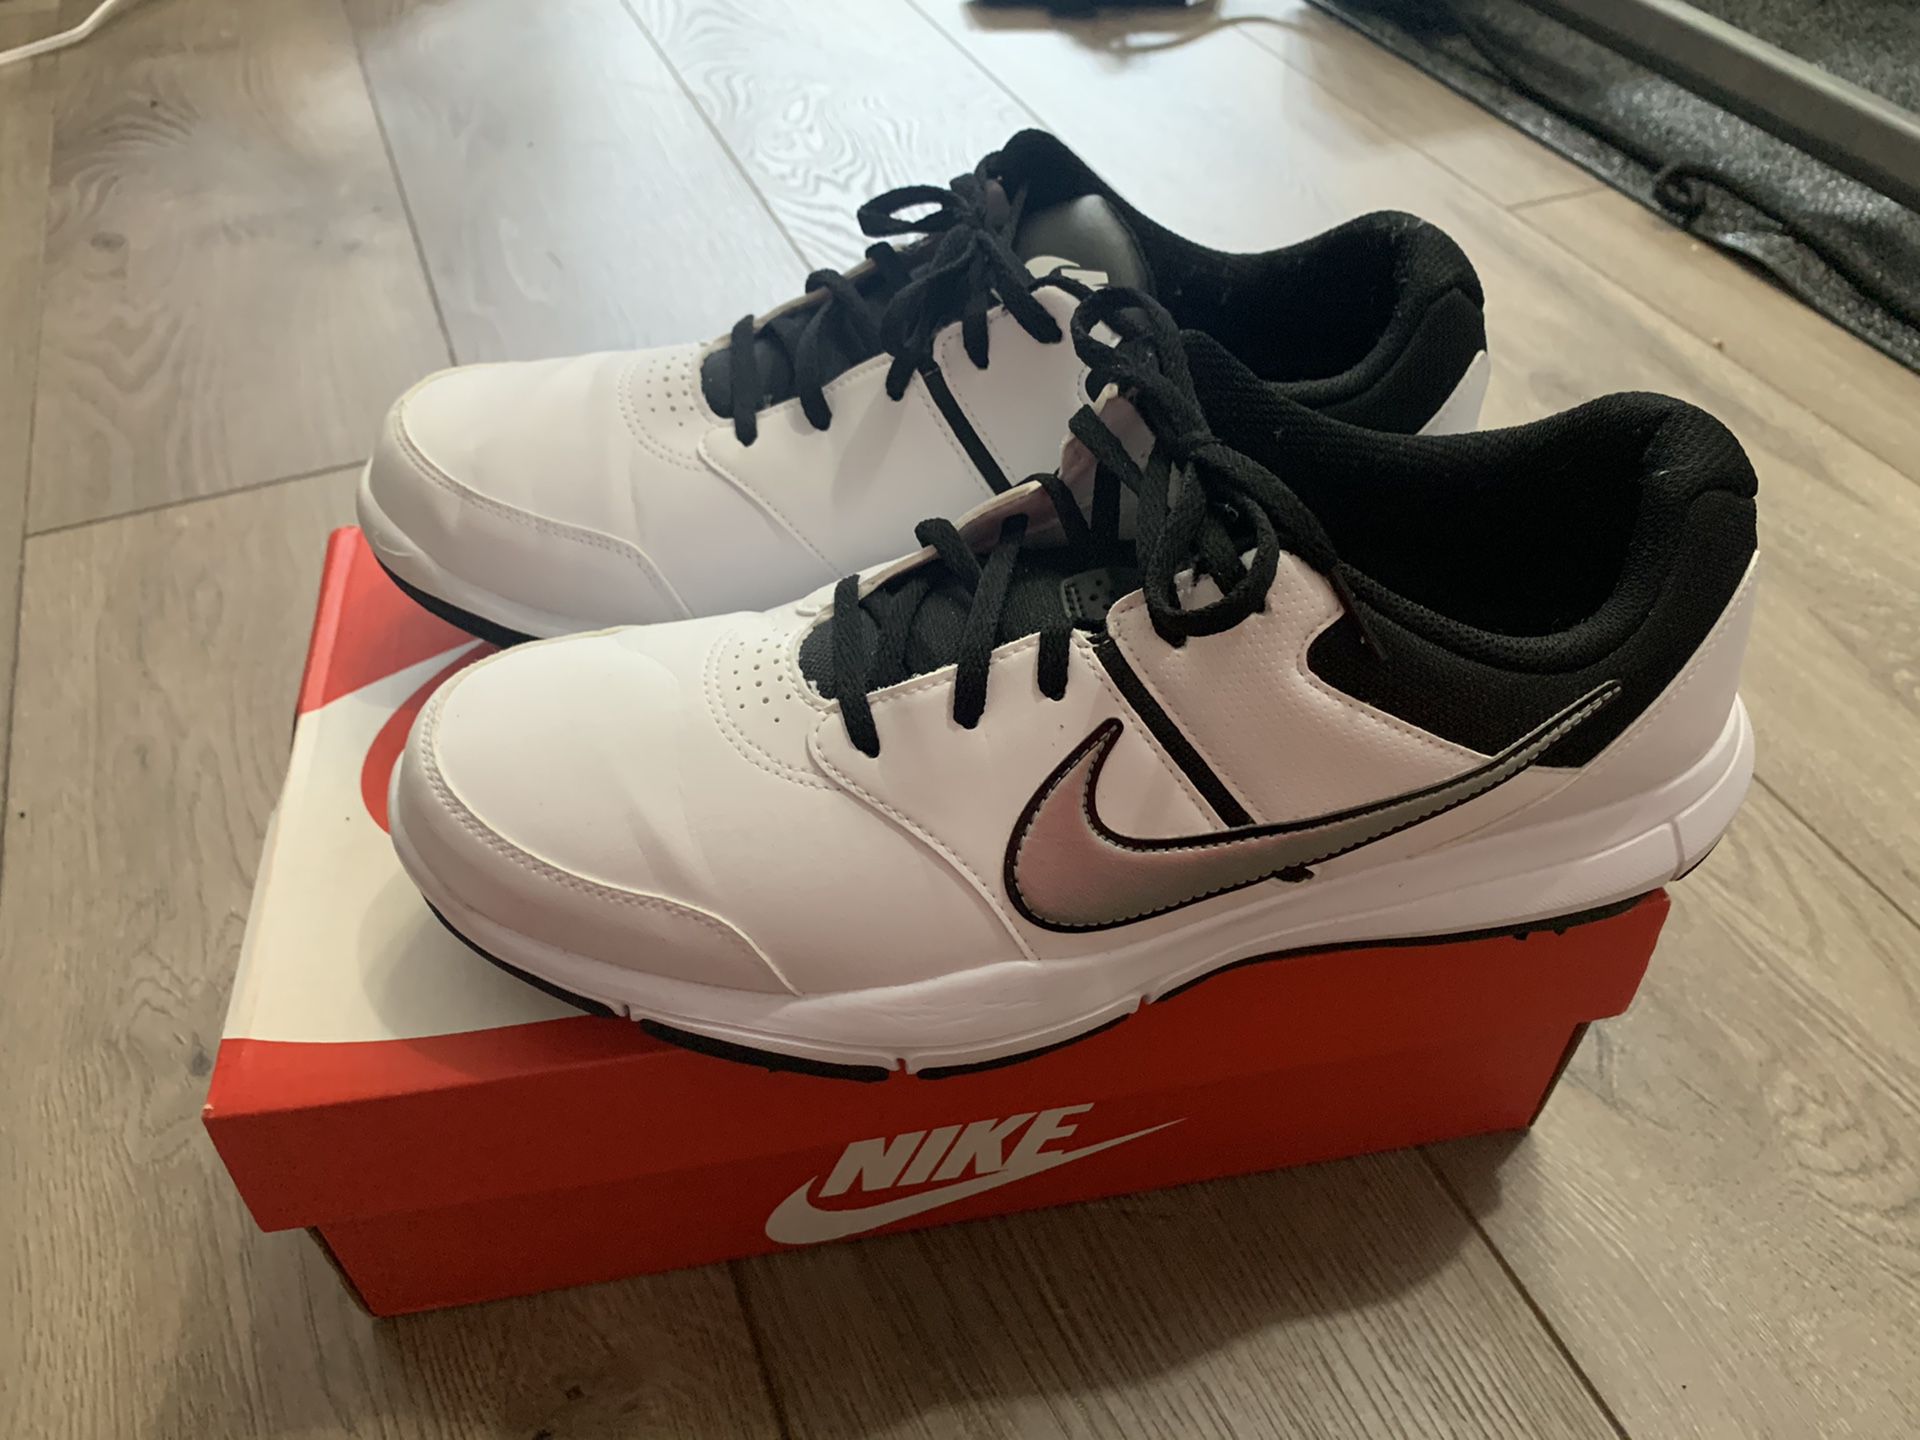 Nike men’s spike golf shoes size 10